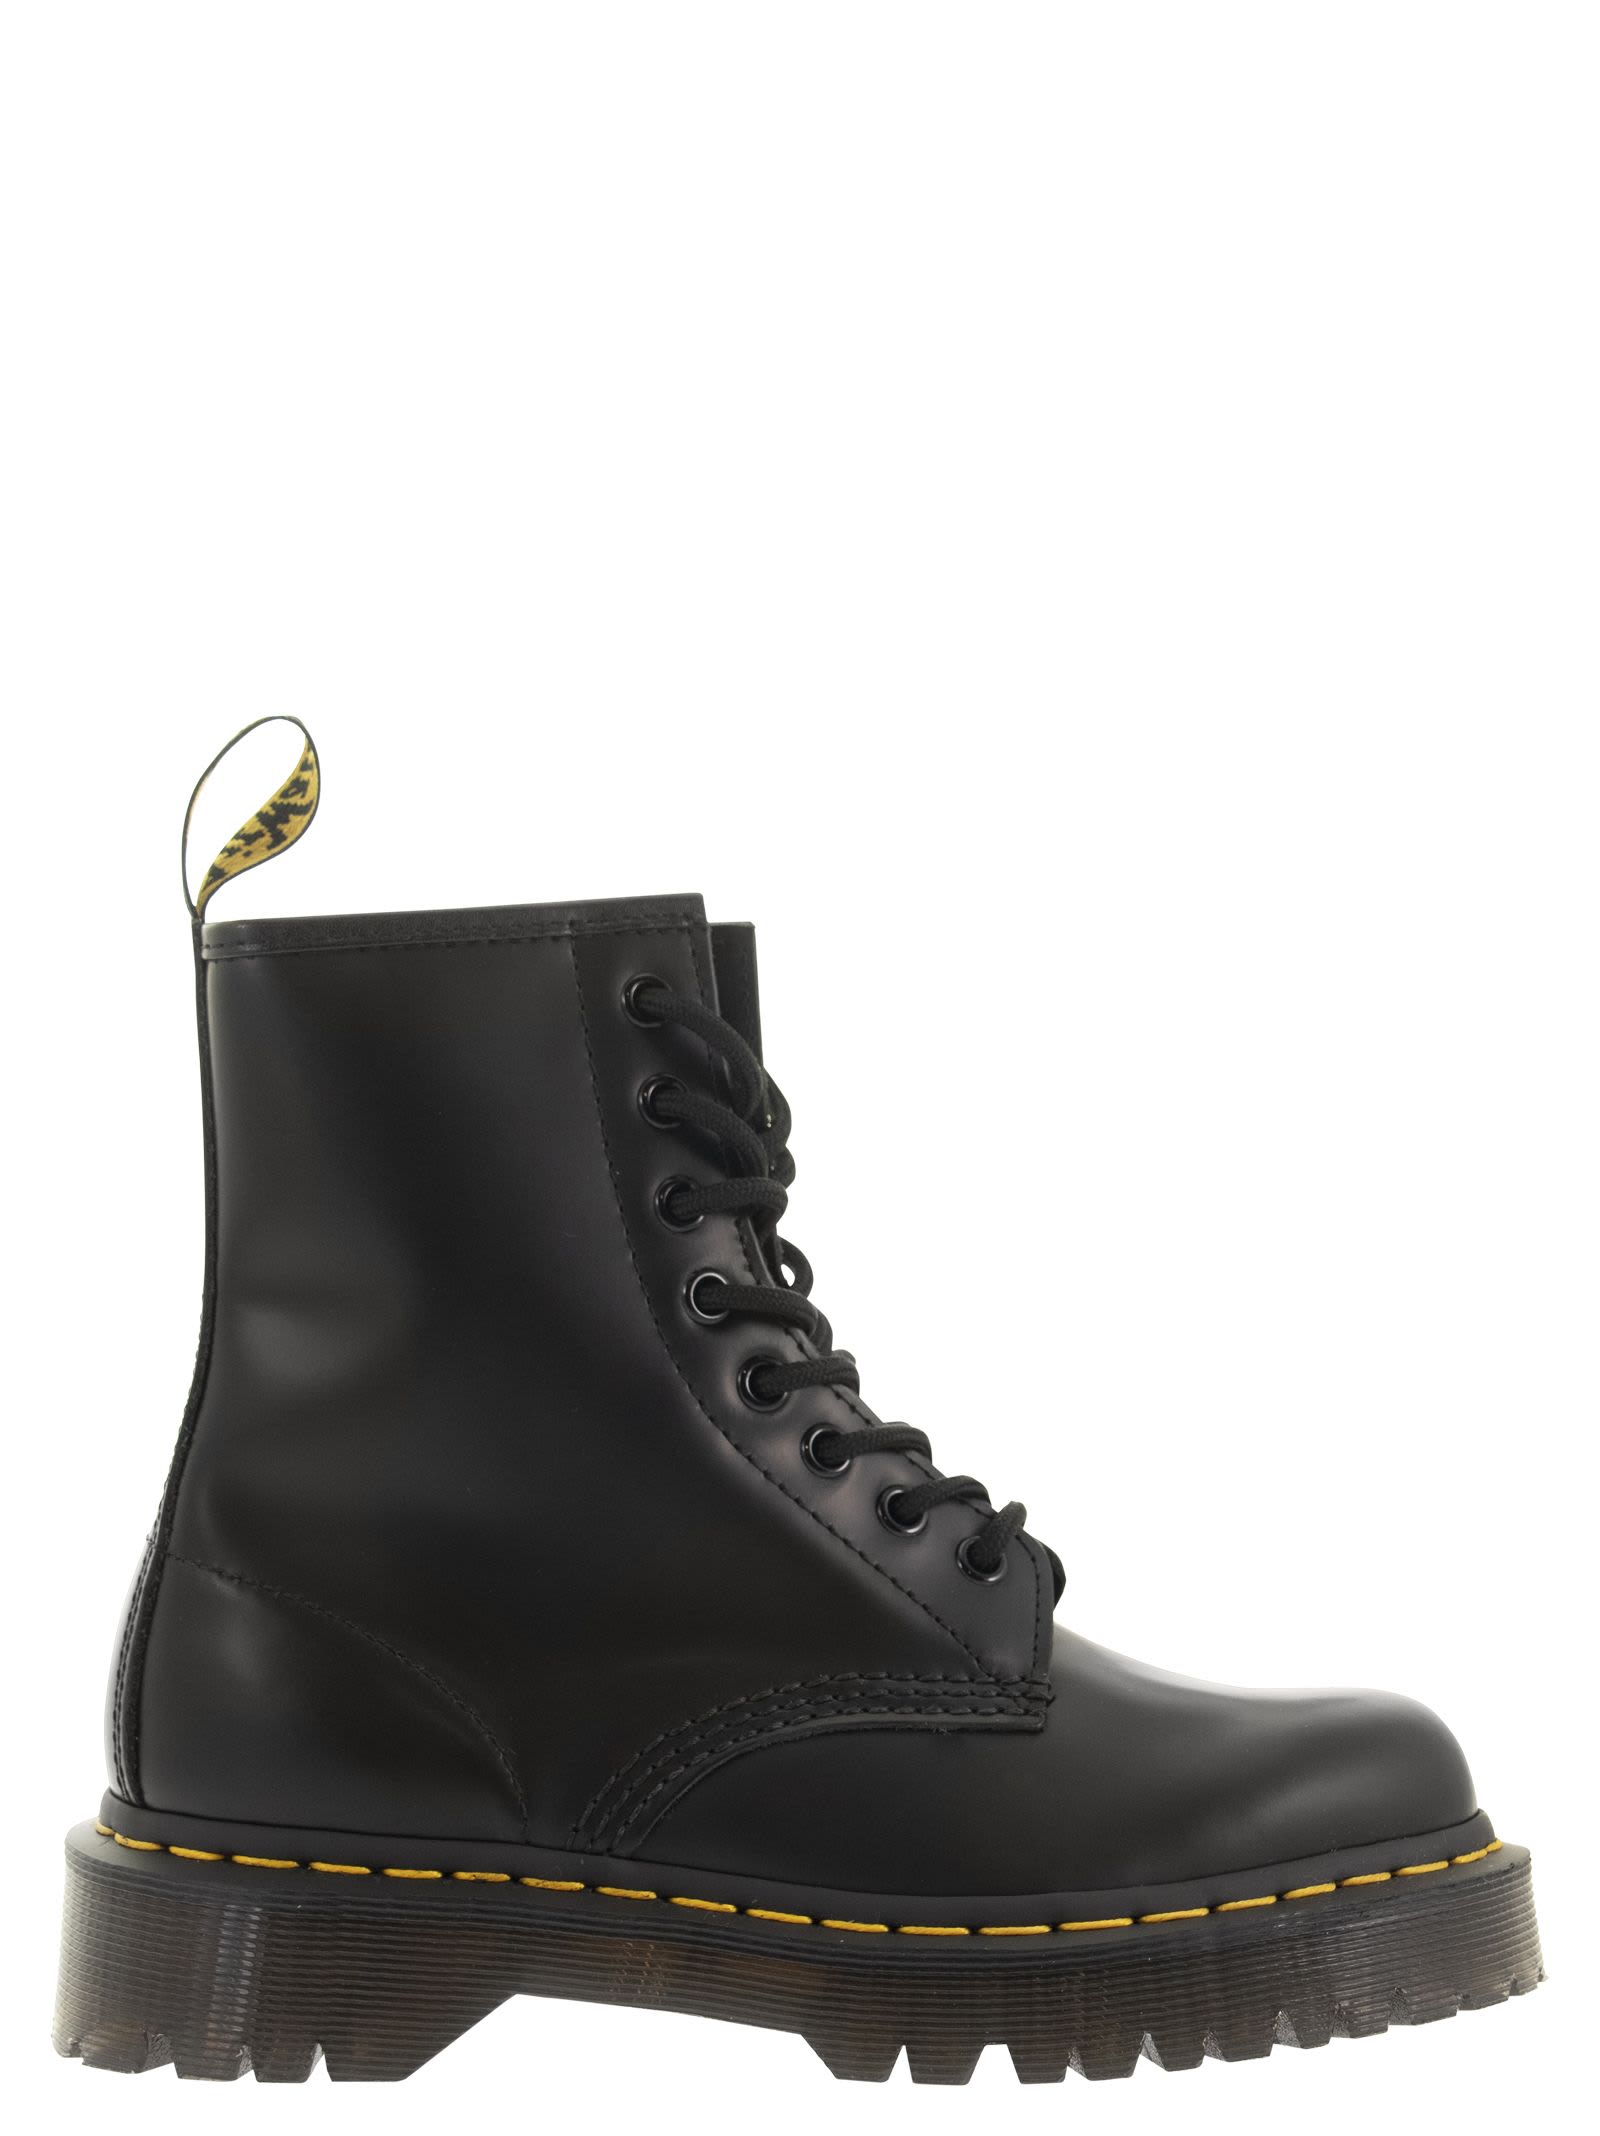 Dr. Martens 1460 Bex Smooth - Leather Ankle Boot